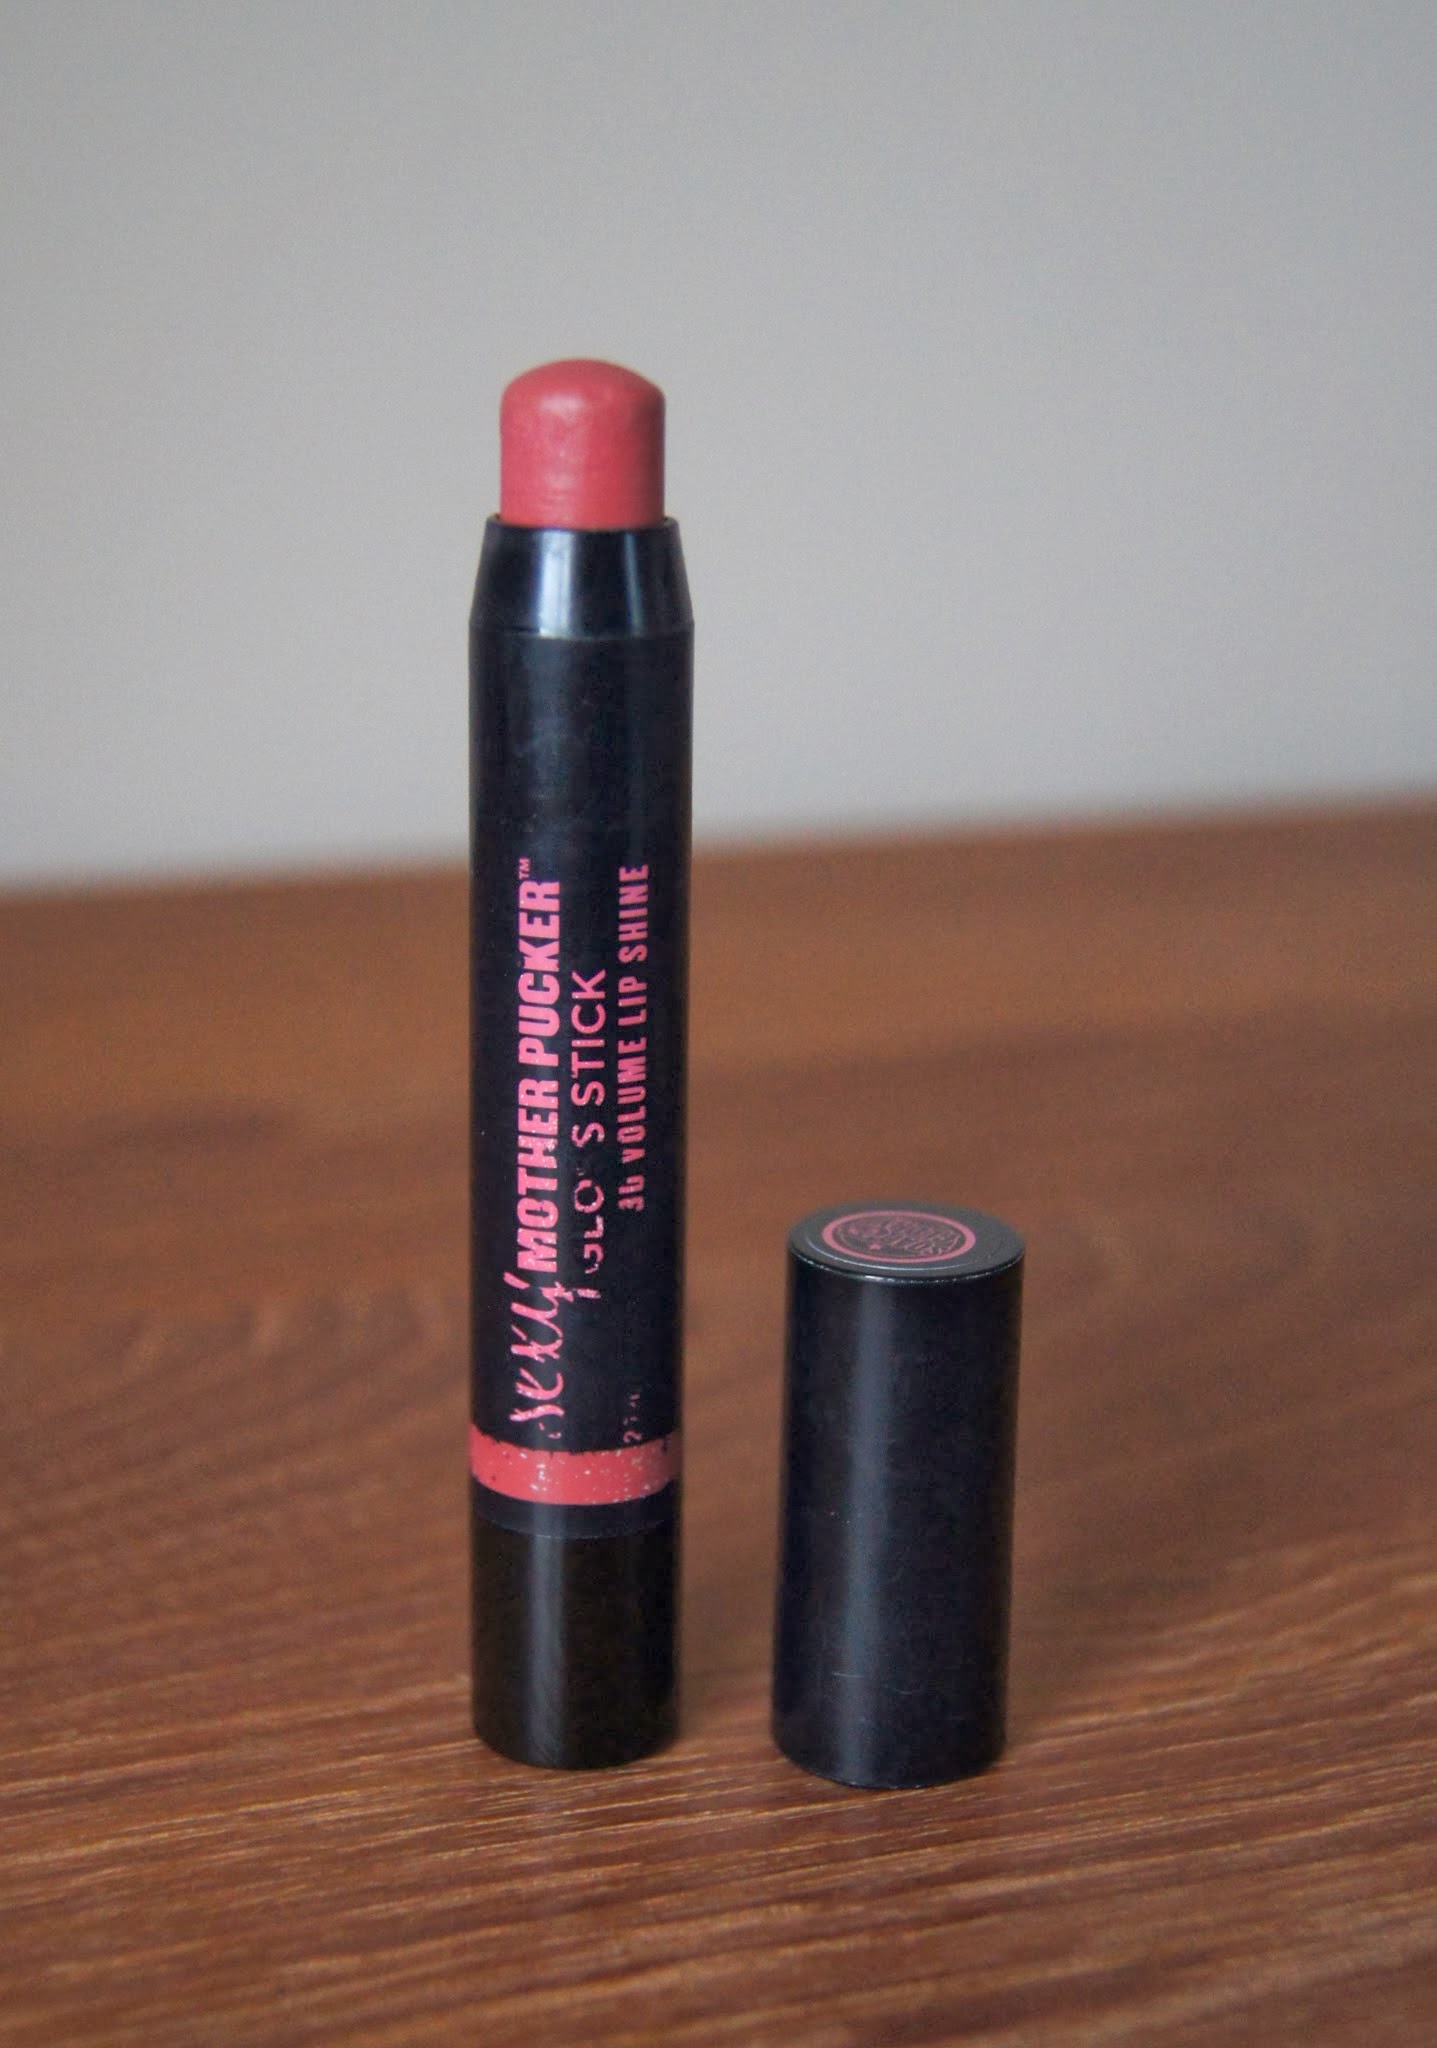 Soap & Glory Sexy Mother Pucker Gloss Stick Review Nudist